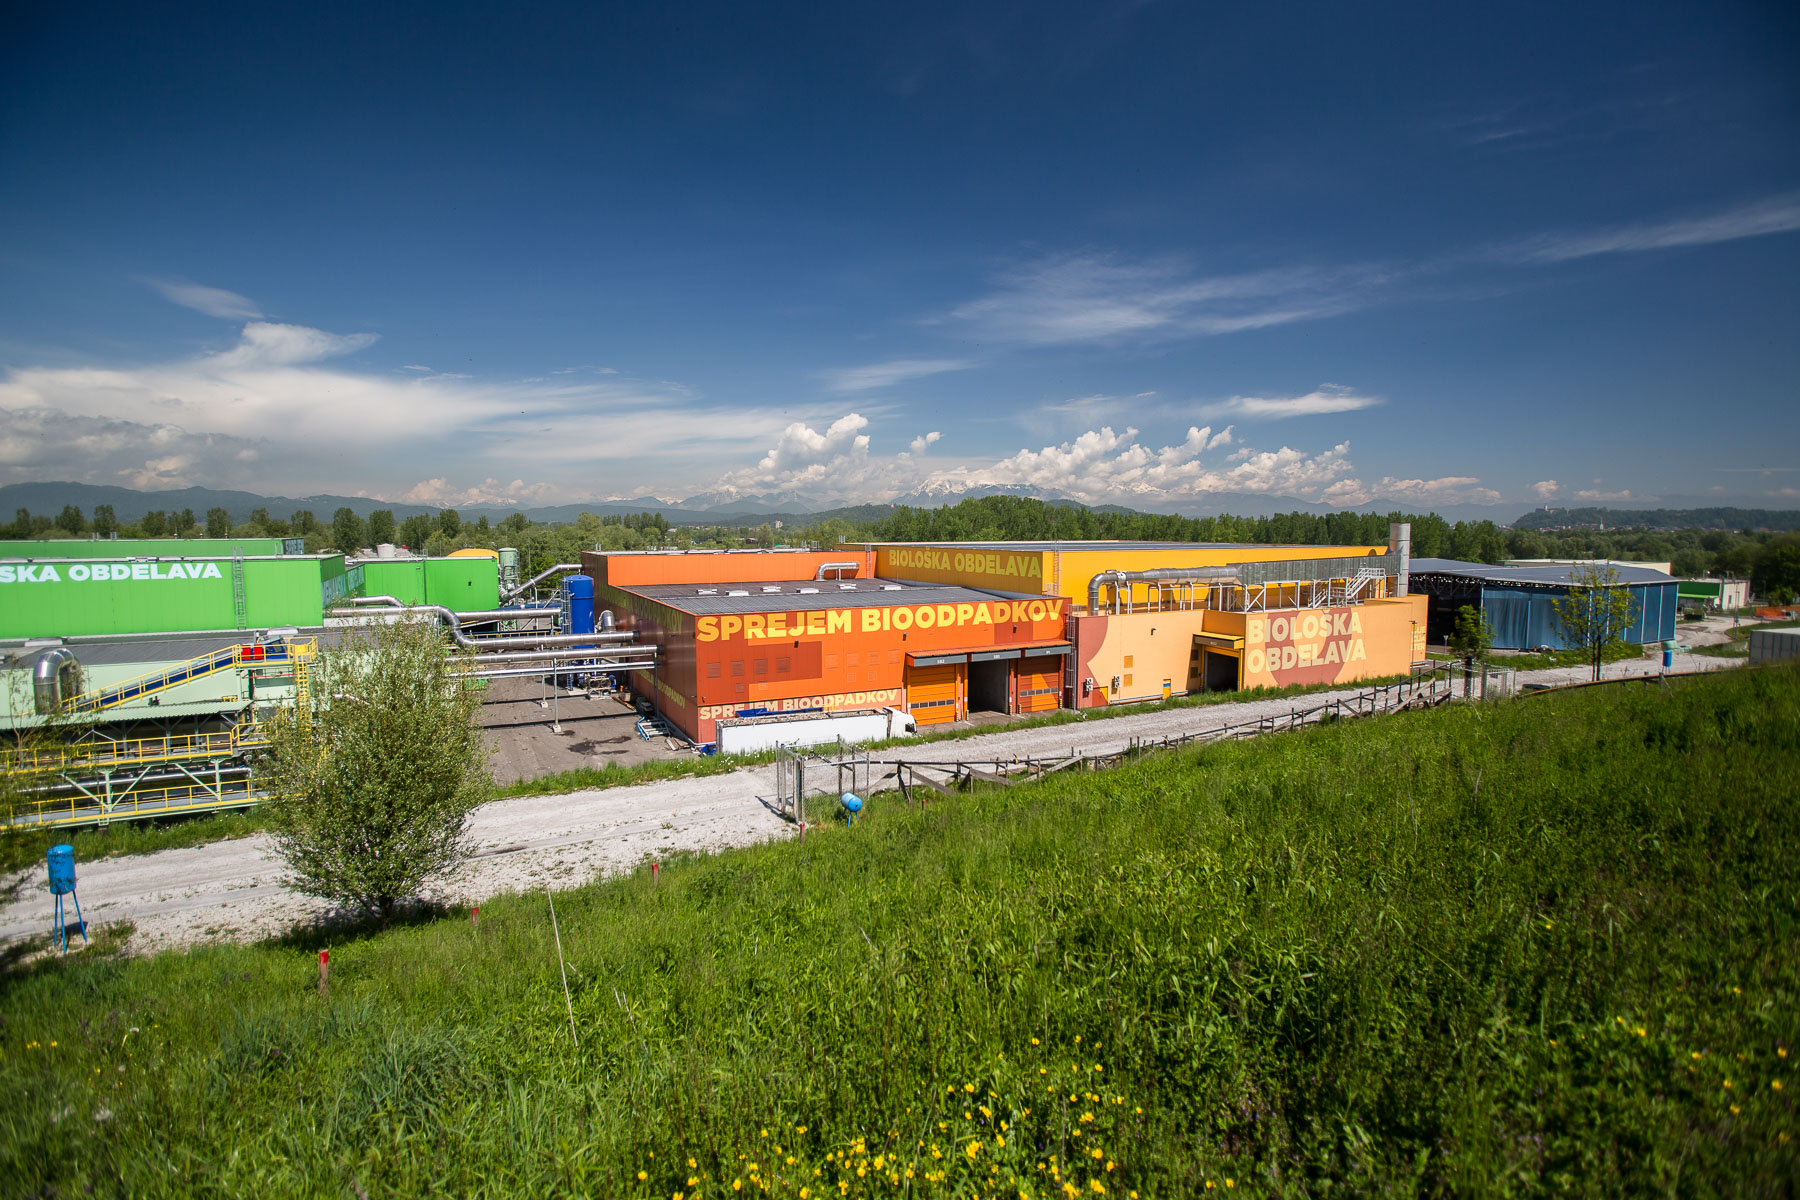 The RCERO mechanical biological treatment plant. Green facilities process residual waste while orange and red facilities process biodegradable waste.